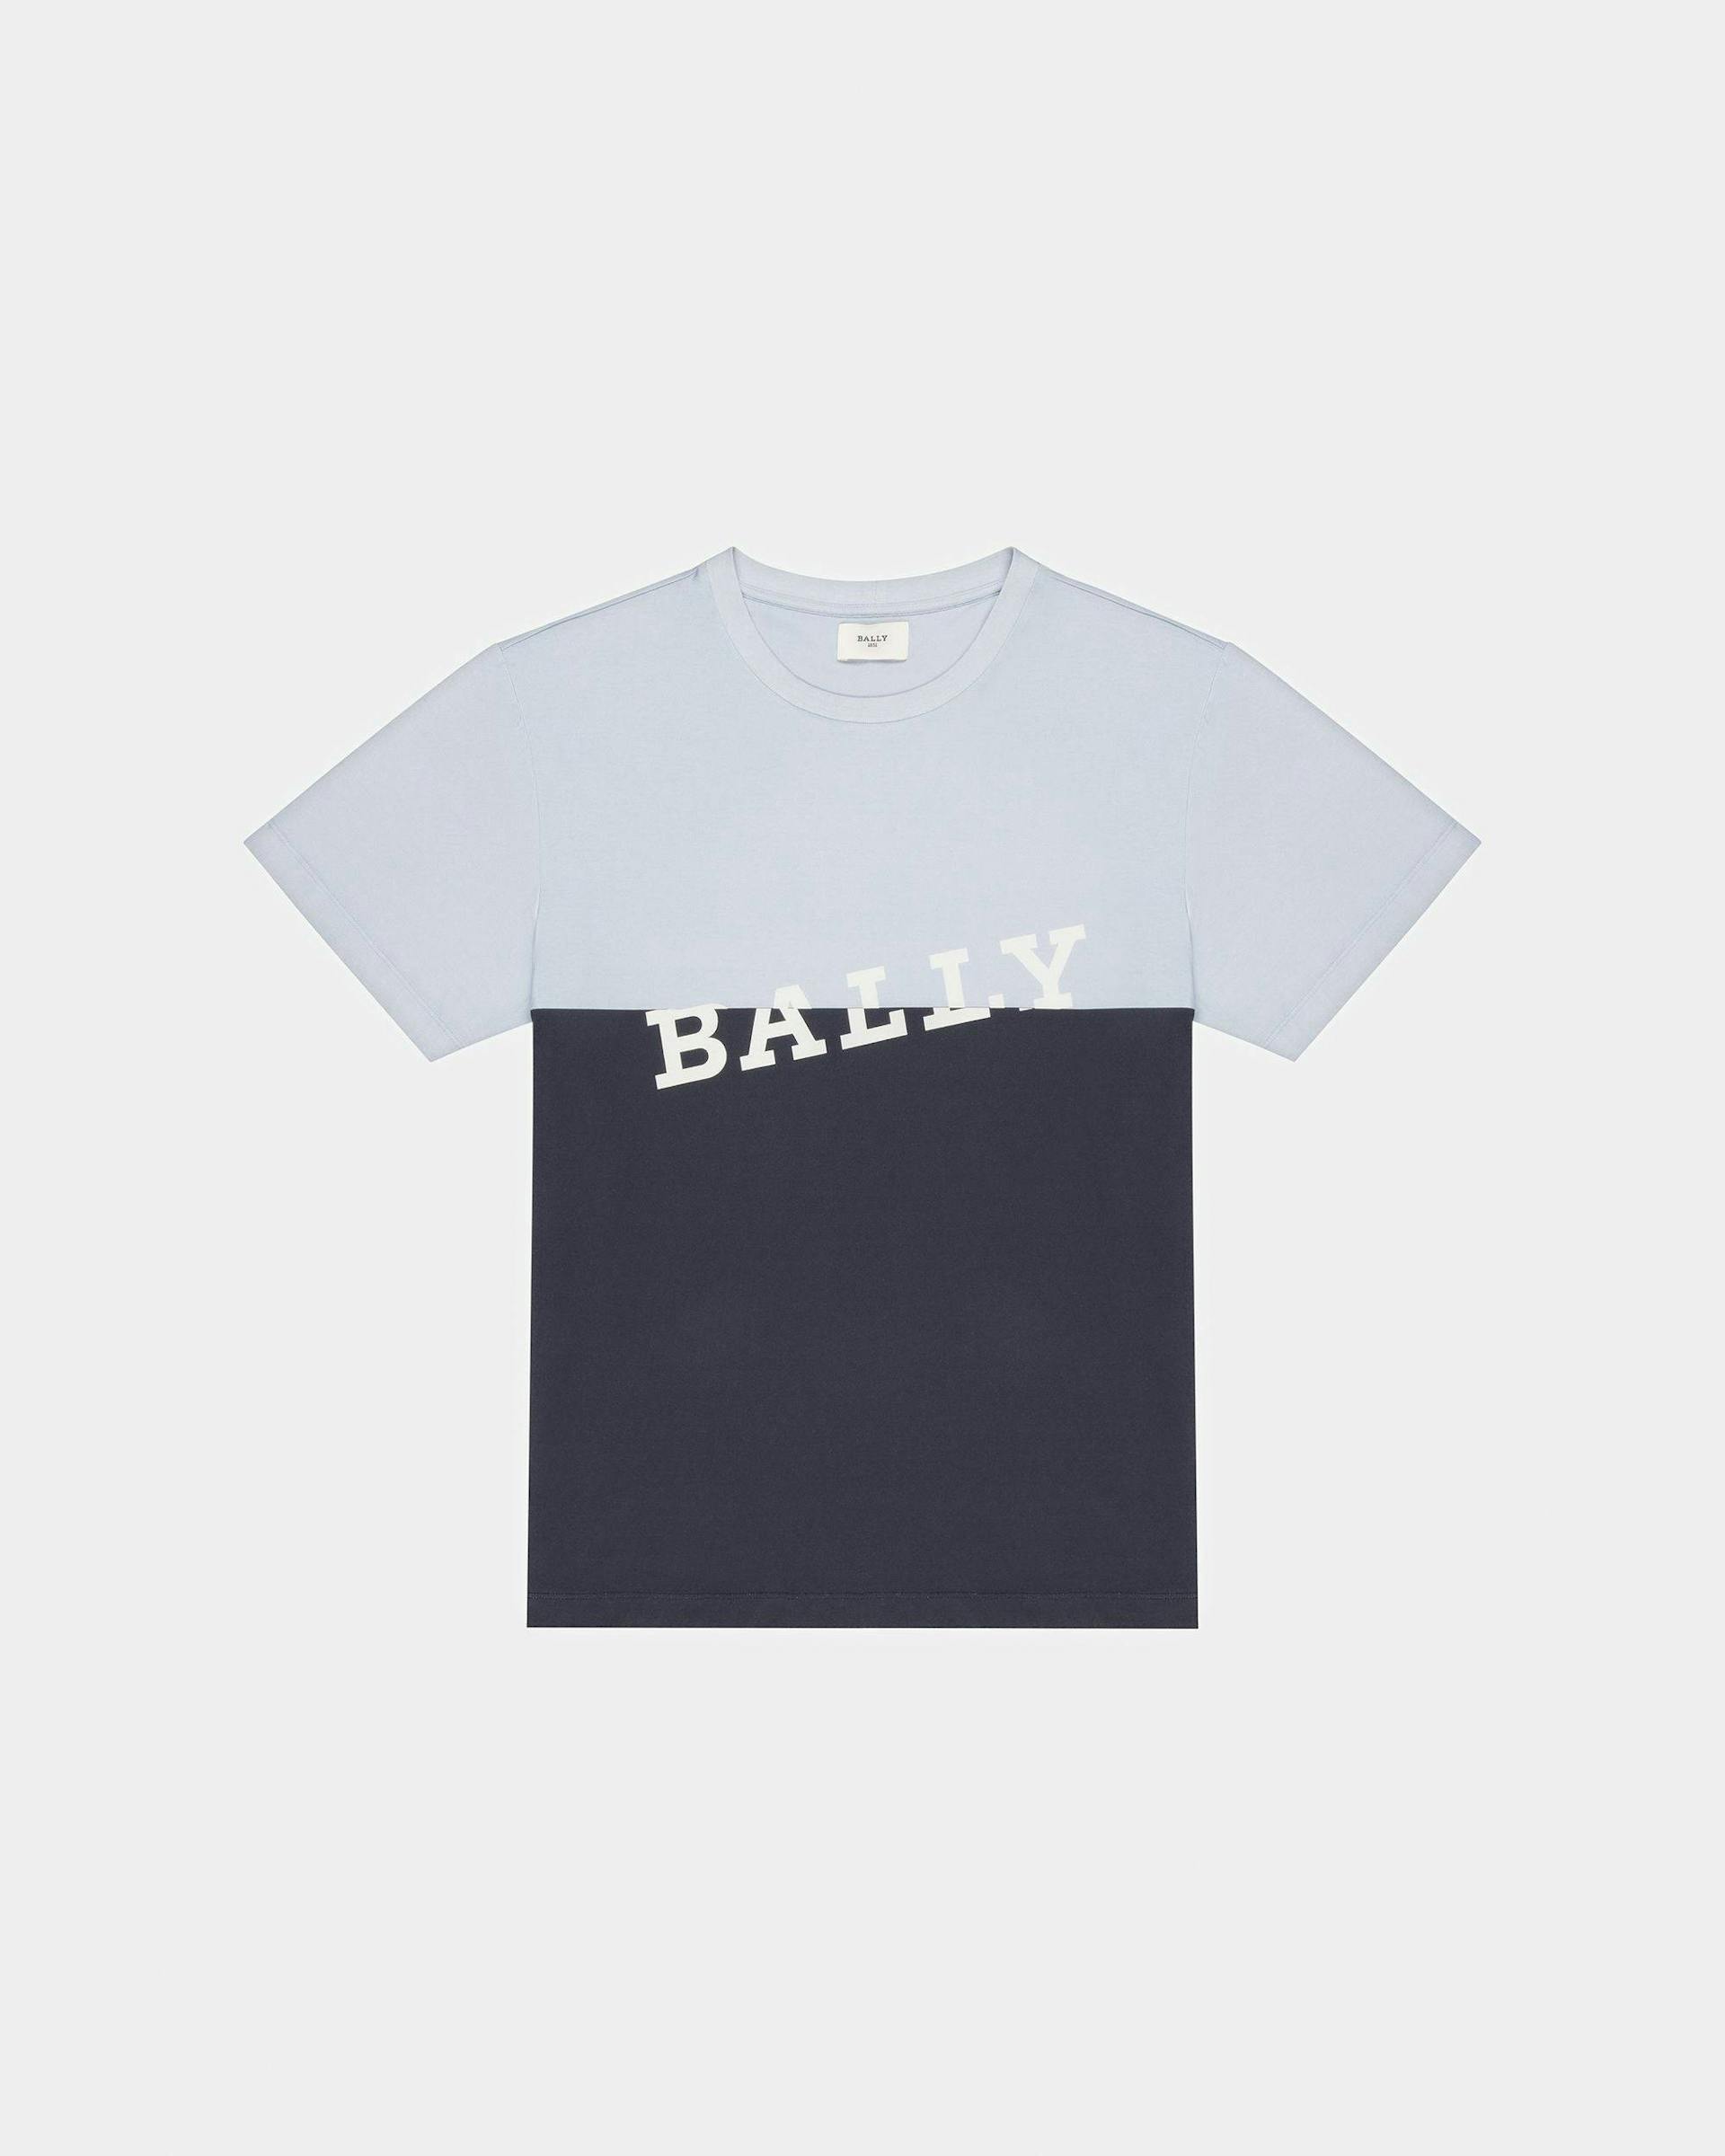 Cotton T-Shirt In Light Blue And Midnight Blue - Men's - Bally - 01